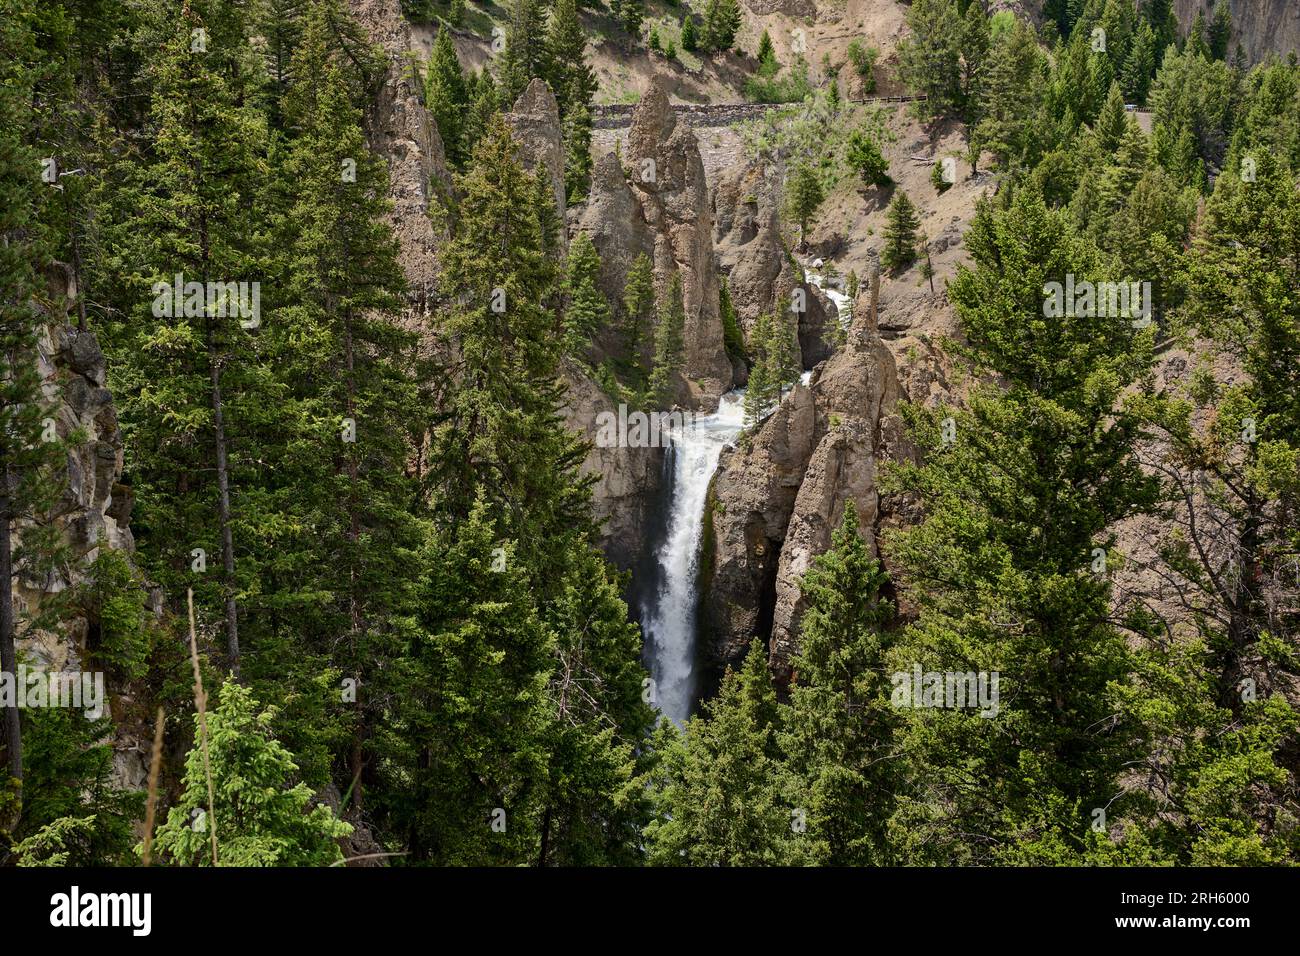 Tower Fall, Yellowstone-Nationalpark, Wyoming, Vereinigte Staaten von Amerika | Tower Fall, Yellowstone National Park, Wyoming, États-Unis d'Ameri Banque D'Images